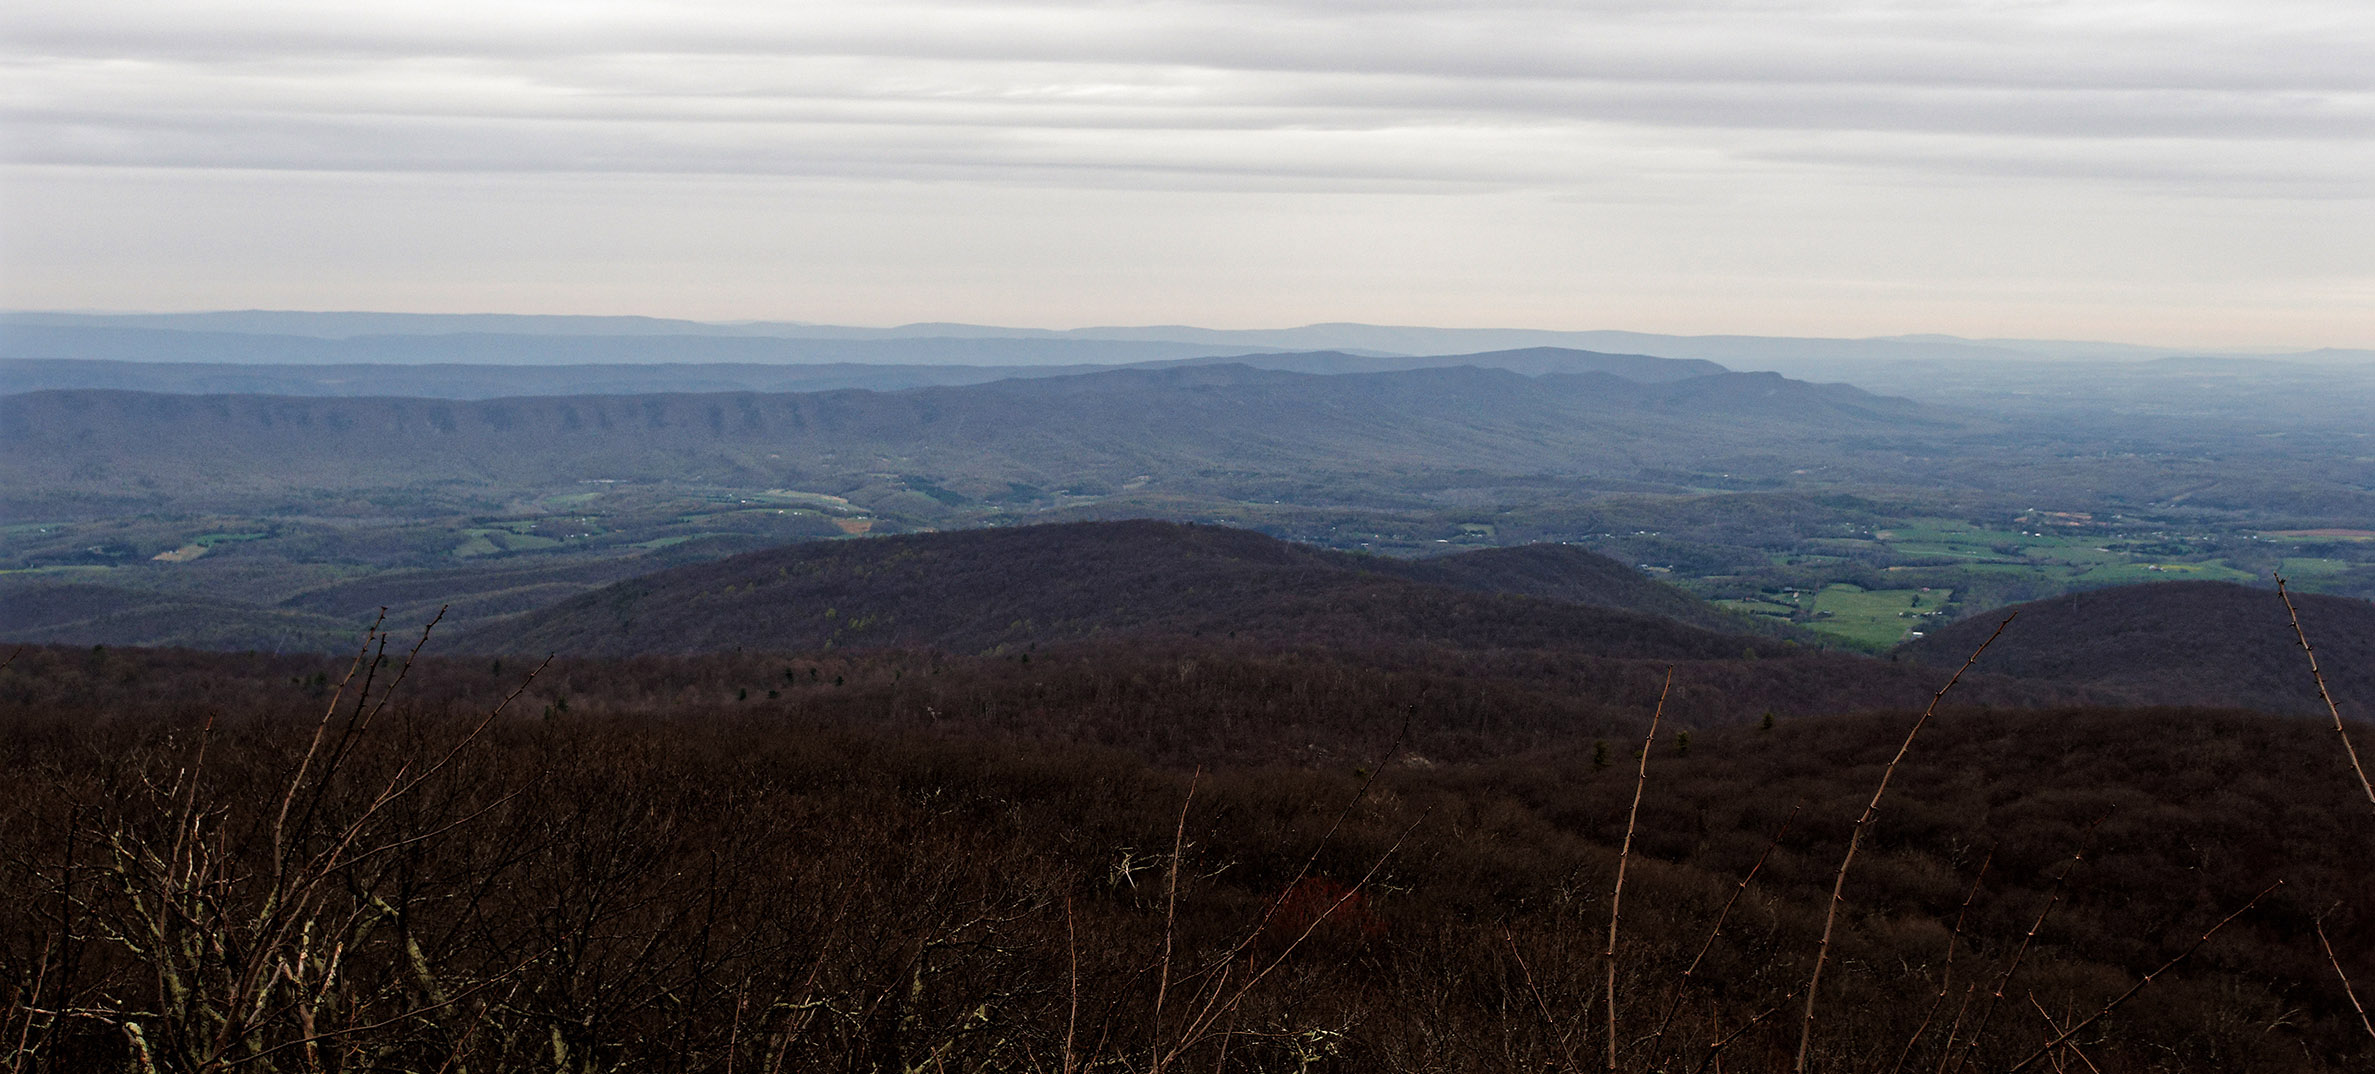 View of Shenandoah Valley and Massanutten Mountain